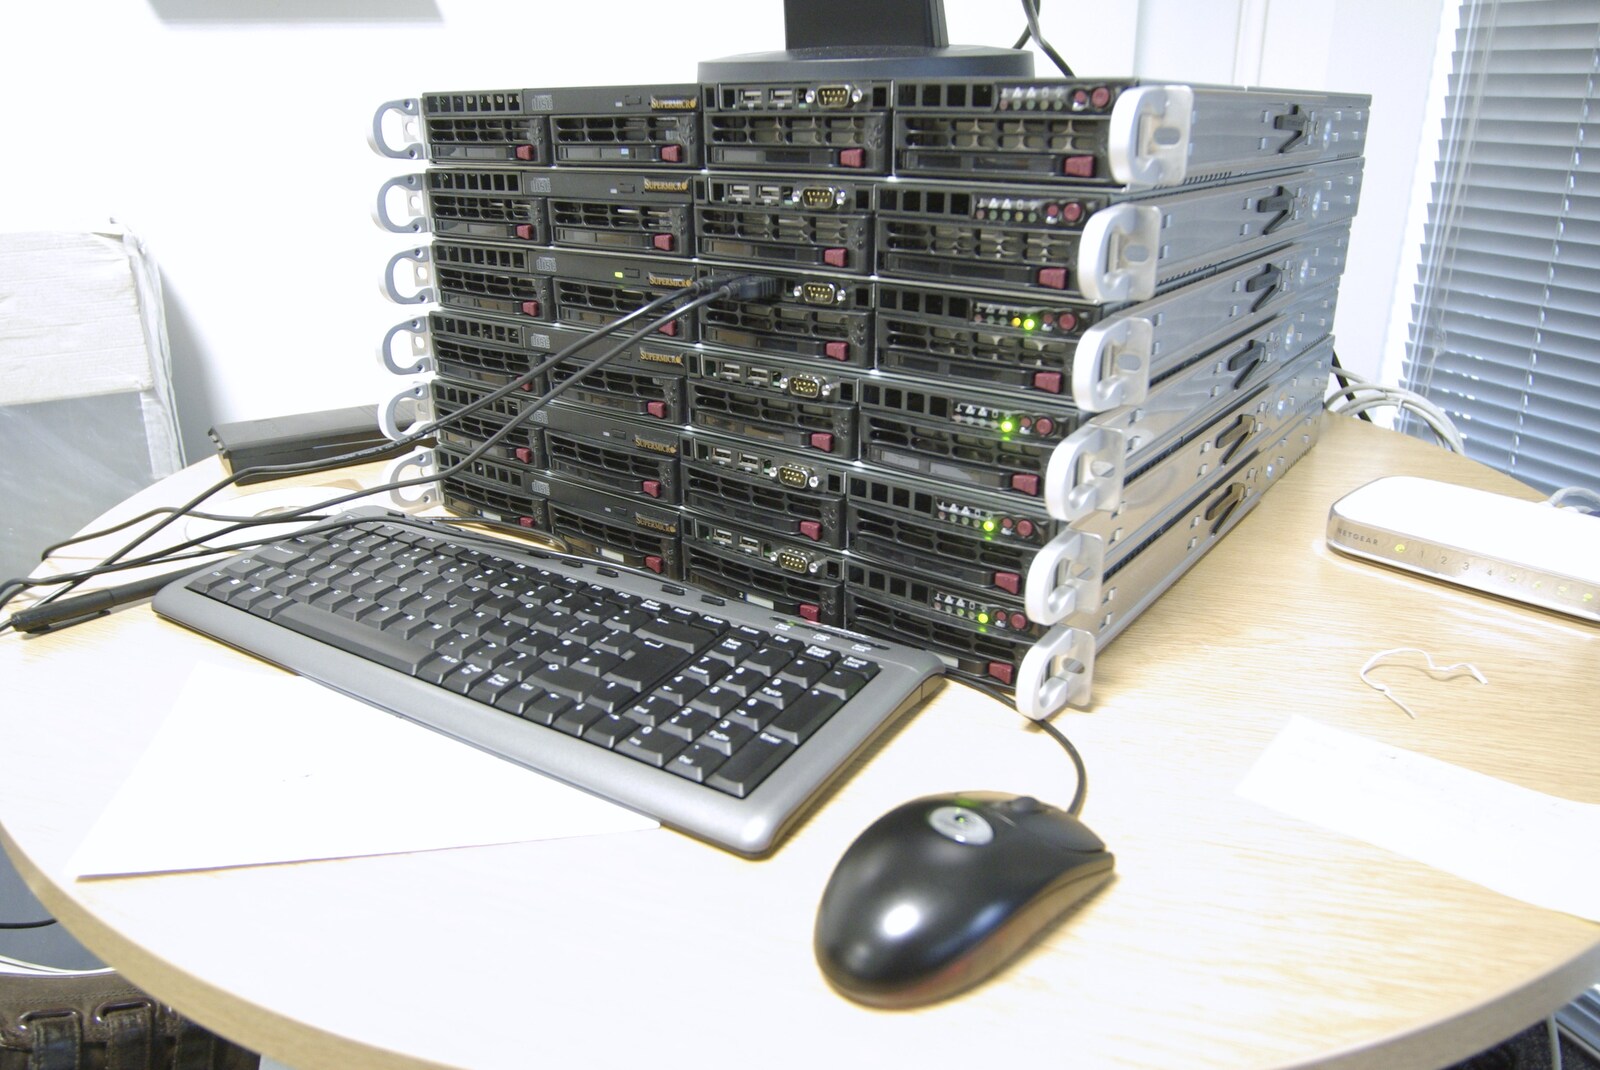 A pile of 1U servers at Taptu from Science Park Demolition, Bjarne Stroustrup, and Taptu/Qualcomm Miscellany, Cambridge - 29th April 2007